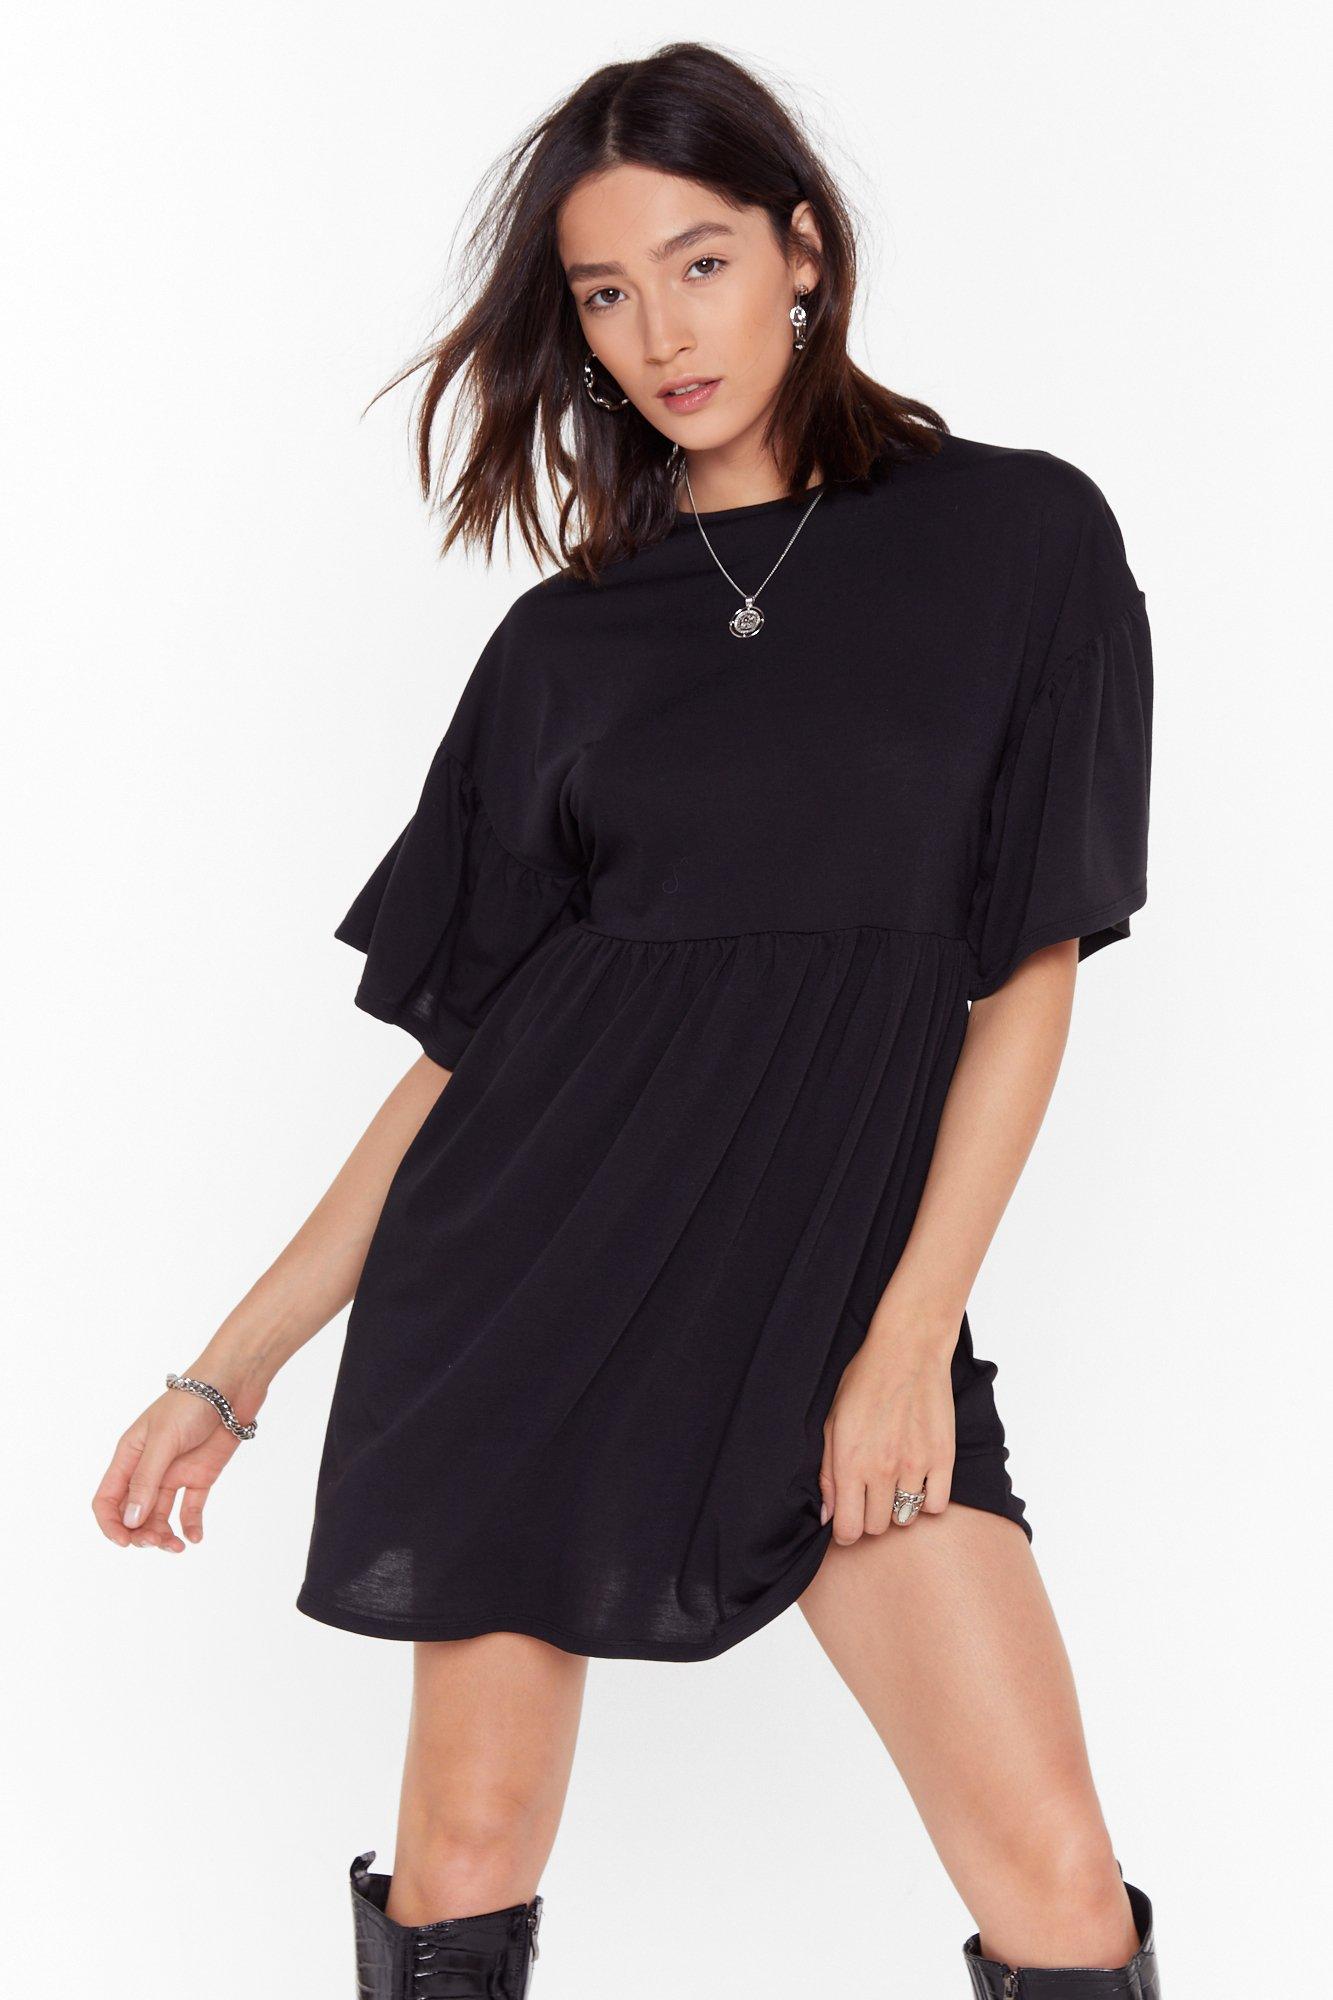 black dress with wide sleeves